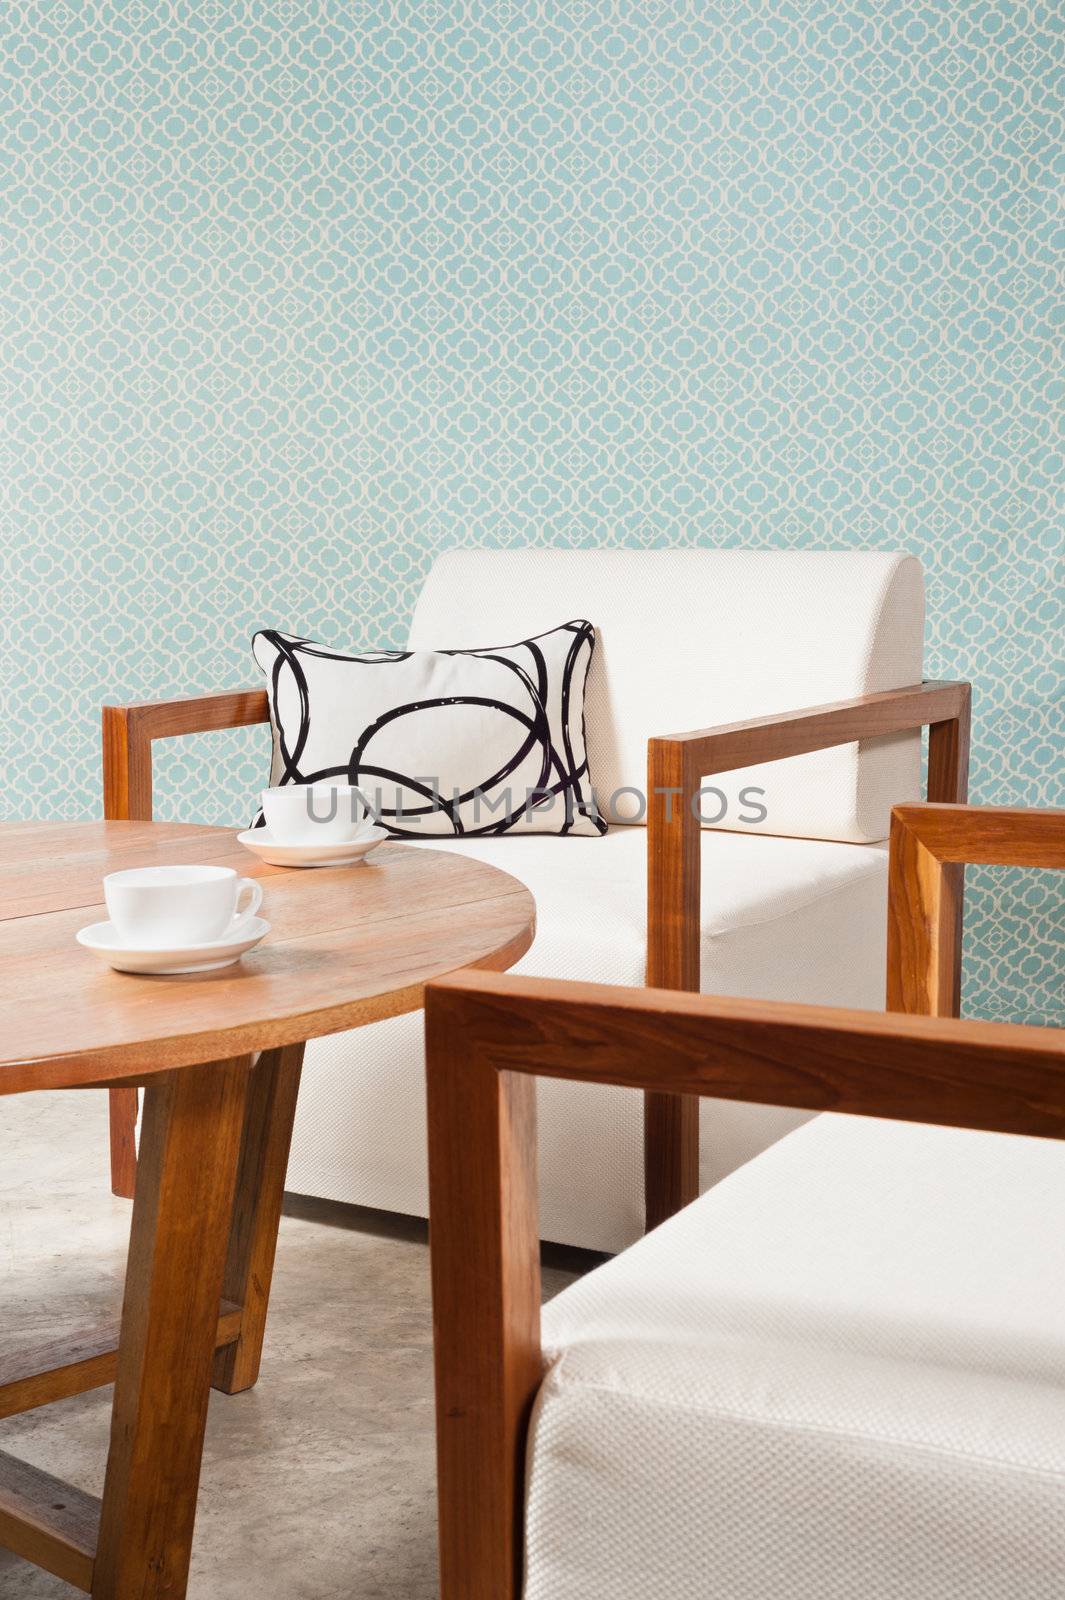 Brown white furniture in a living room and turquoise blue wallpaper